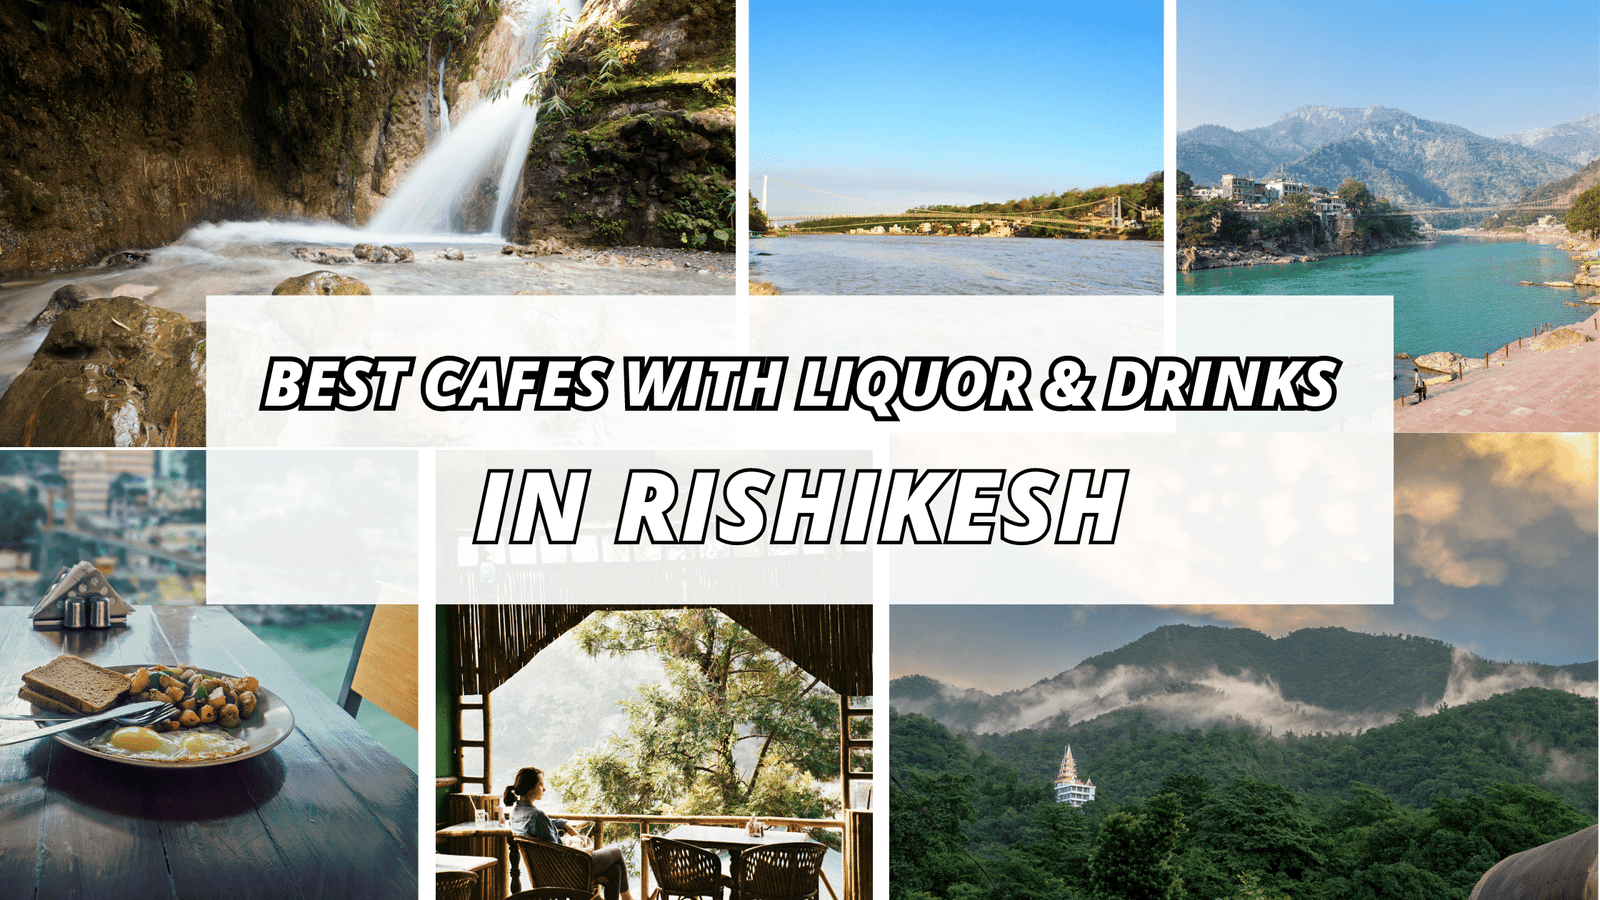 Best Cafes With Liquor & Drinks in Rishikesh.